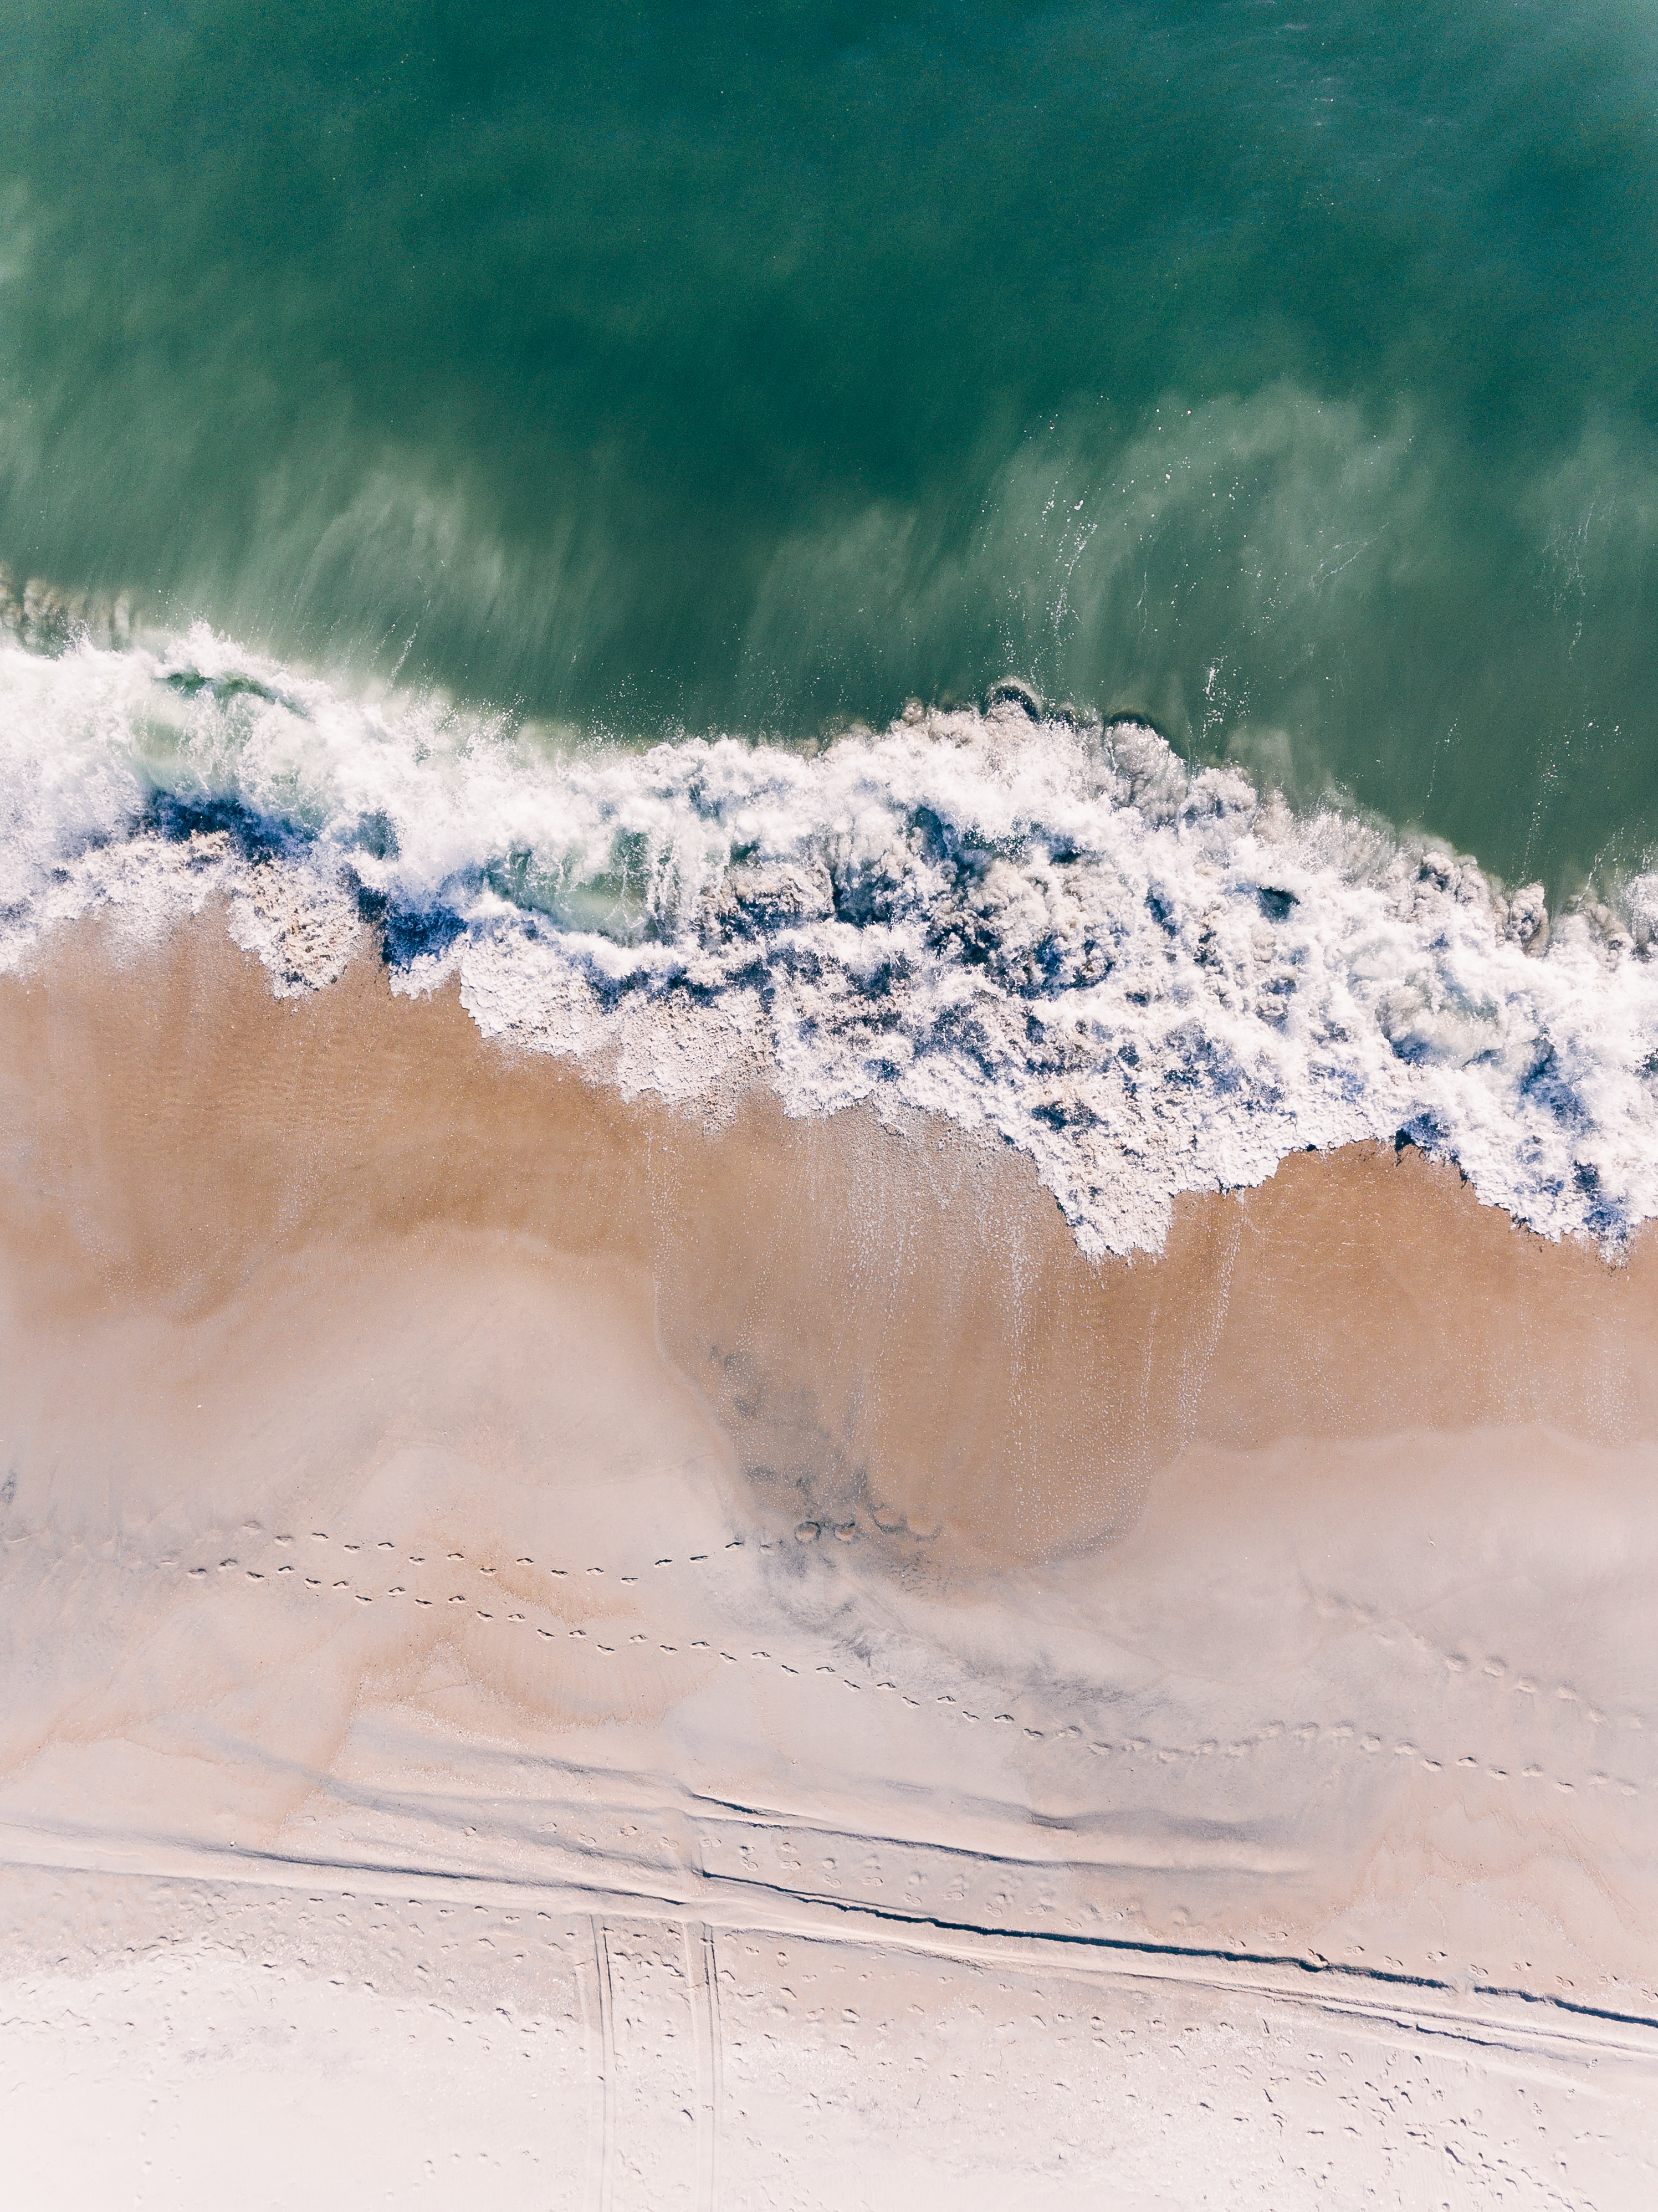 Desktop Backgrounds Surf view from above, sand, wave, ocean